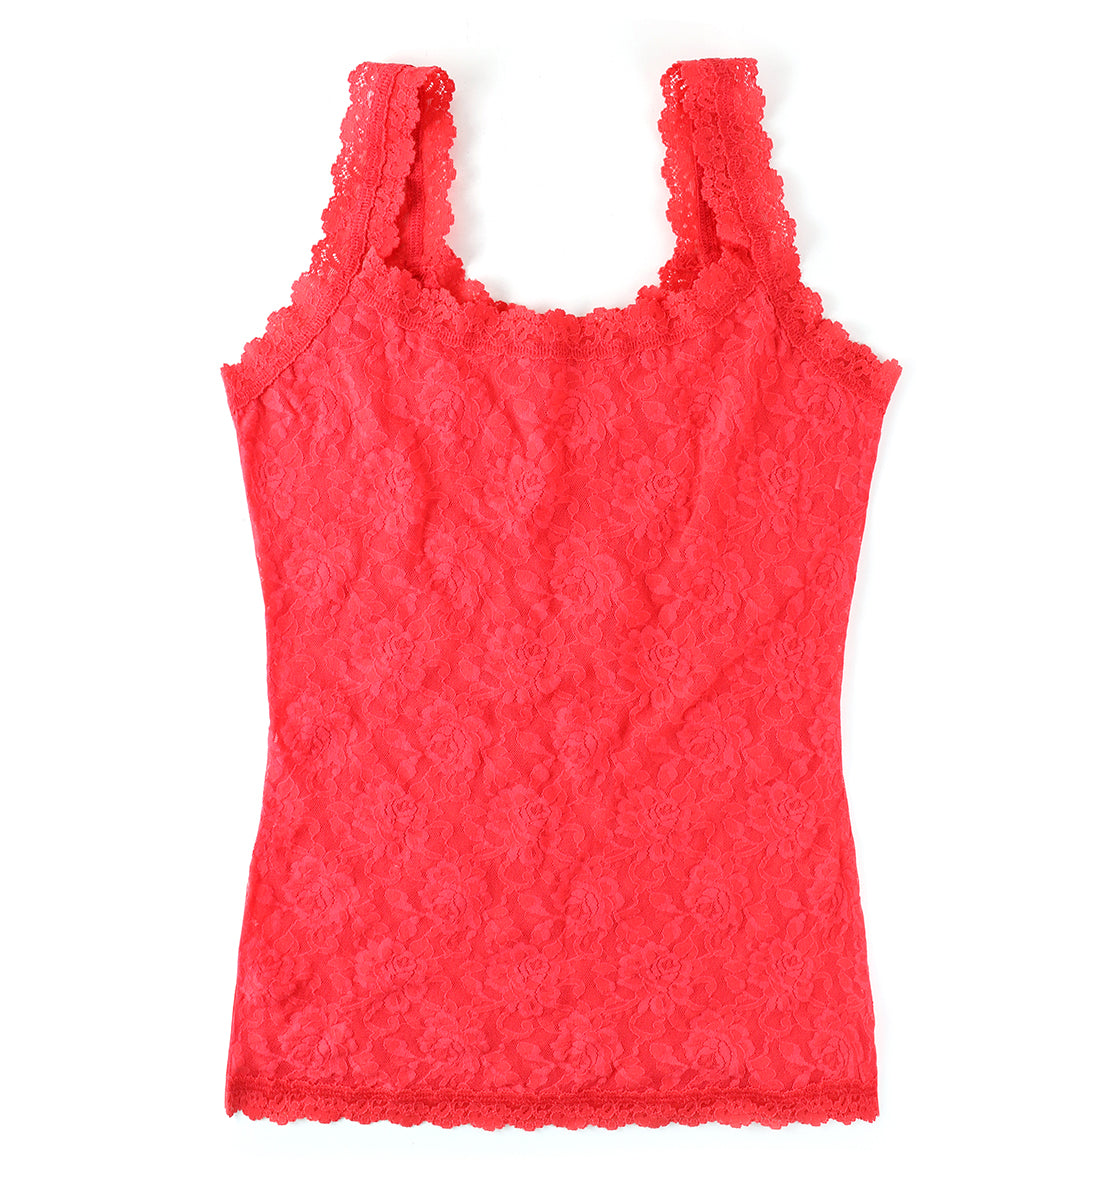 Hanky Panky Signature Lace Unlined Camisole (1390L),XS,Deep Sea Coral - Deep Sea Coral,XS